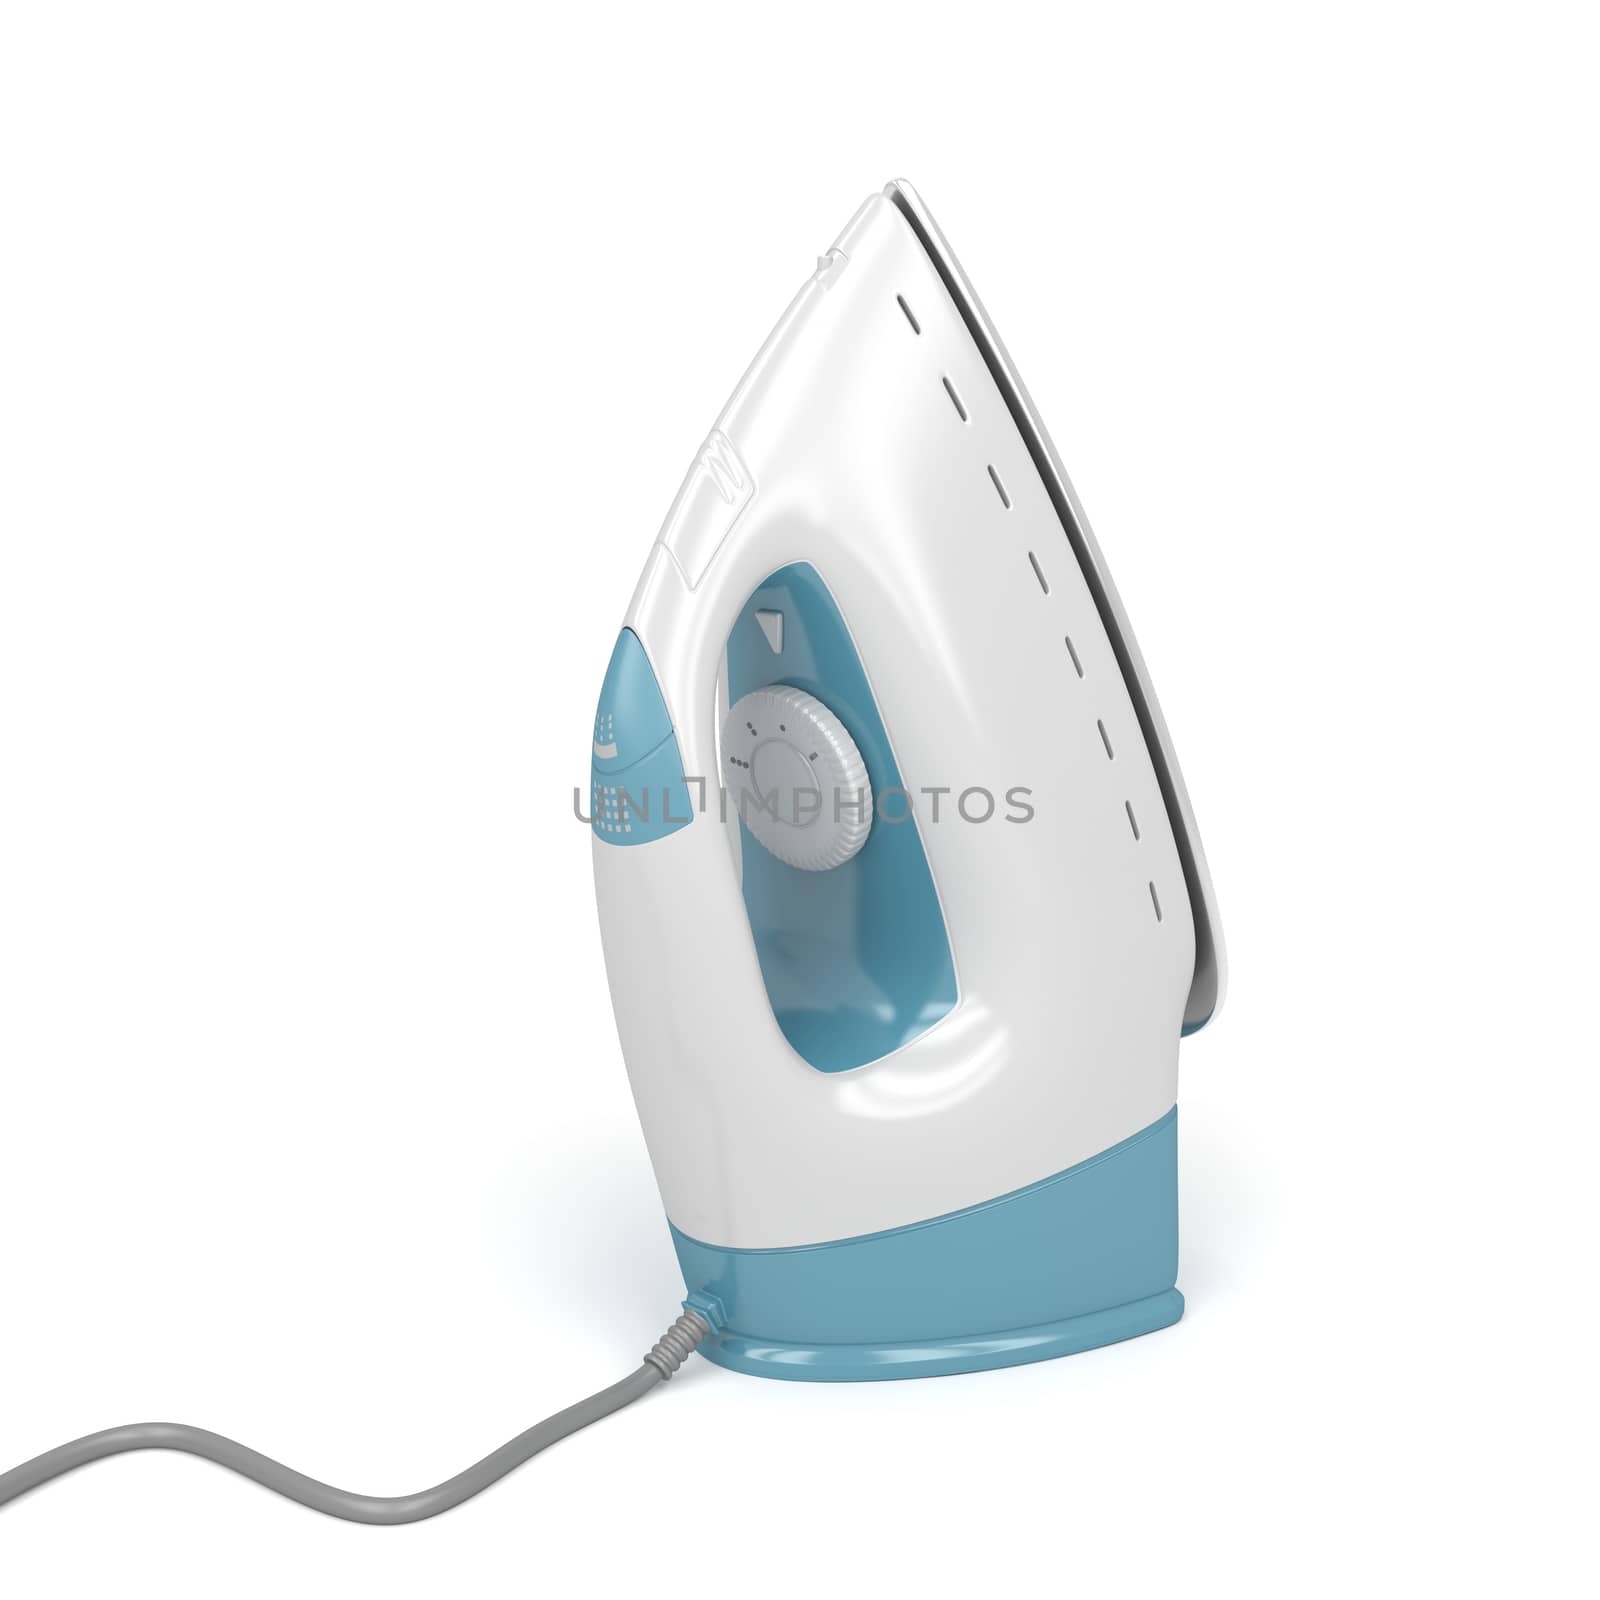 Steam iron on white by magraphics